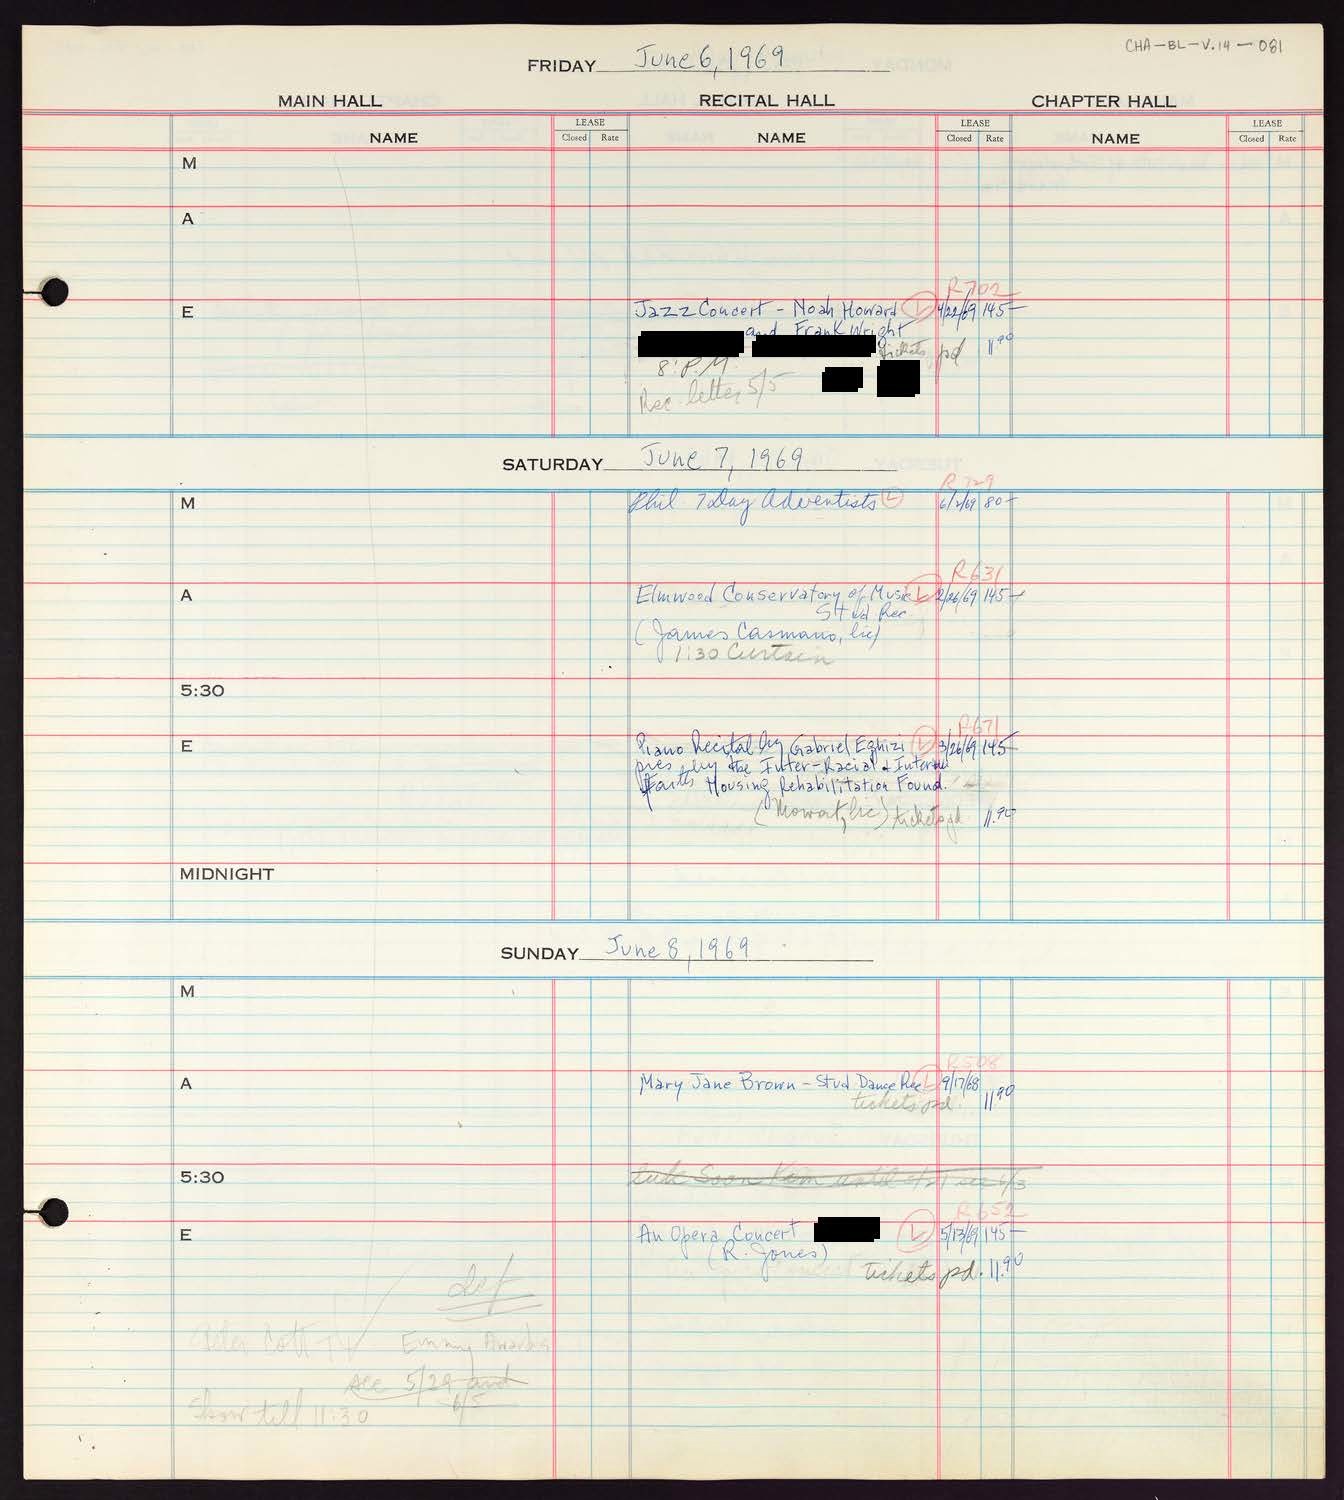 Carnegie Hall Booking Ledger, volume 14, page 81